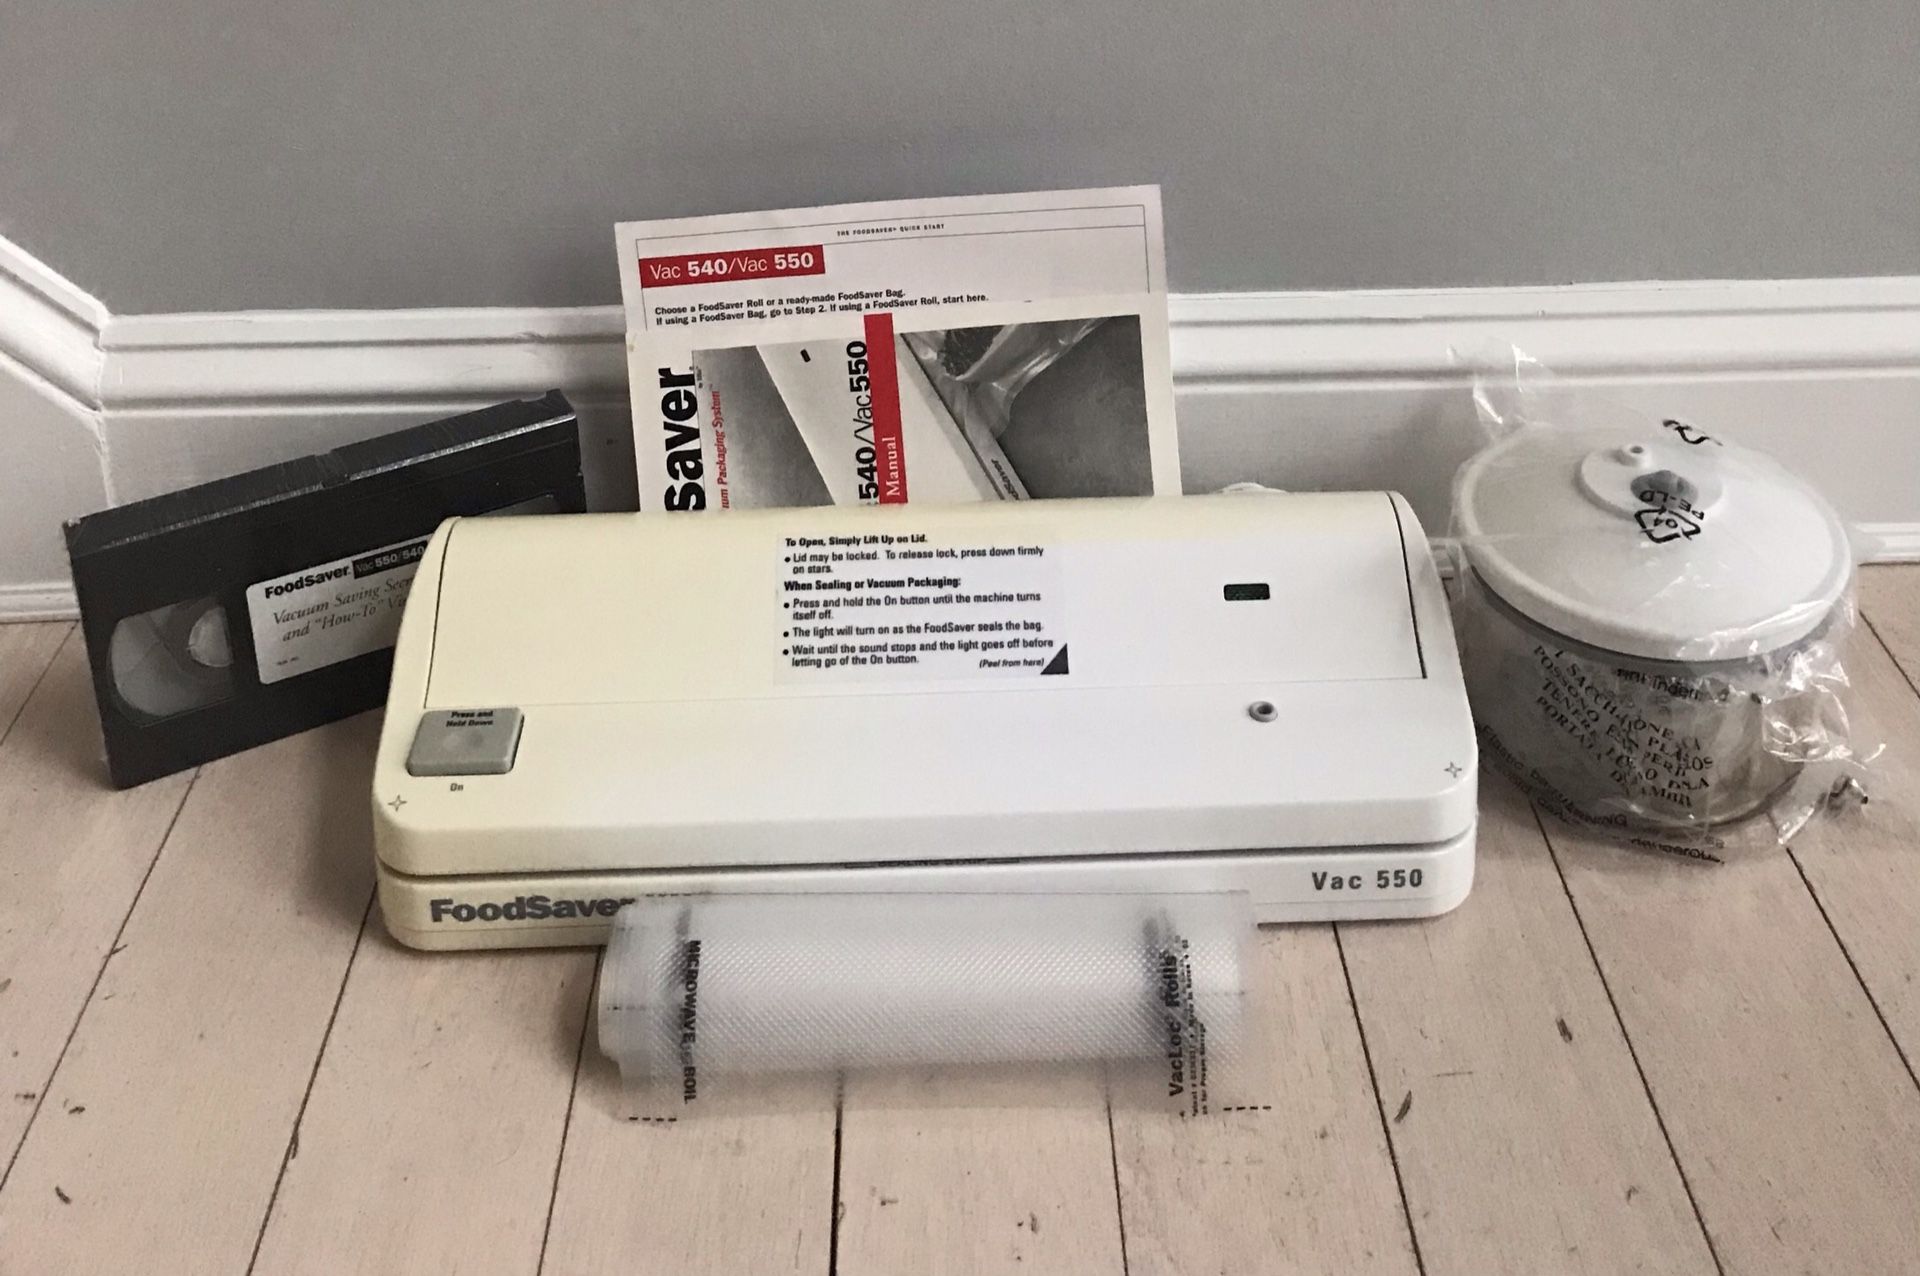 Food Saver Vac 550 Home Vacuum Packaging System with Extras 